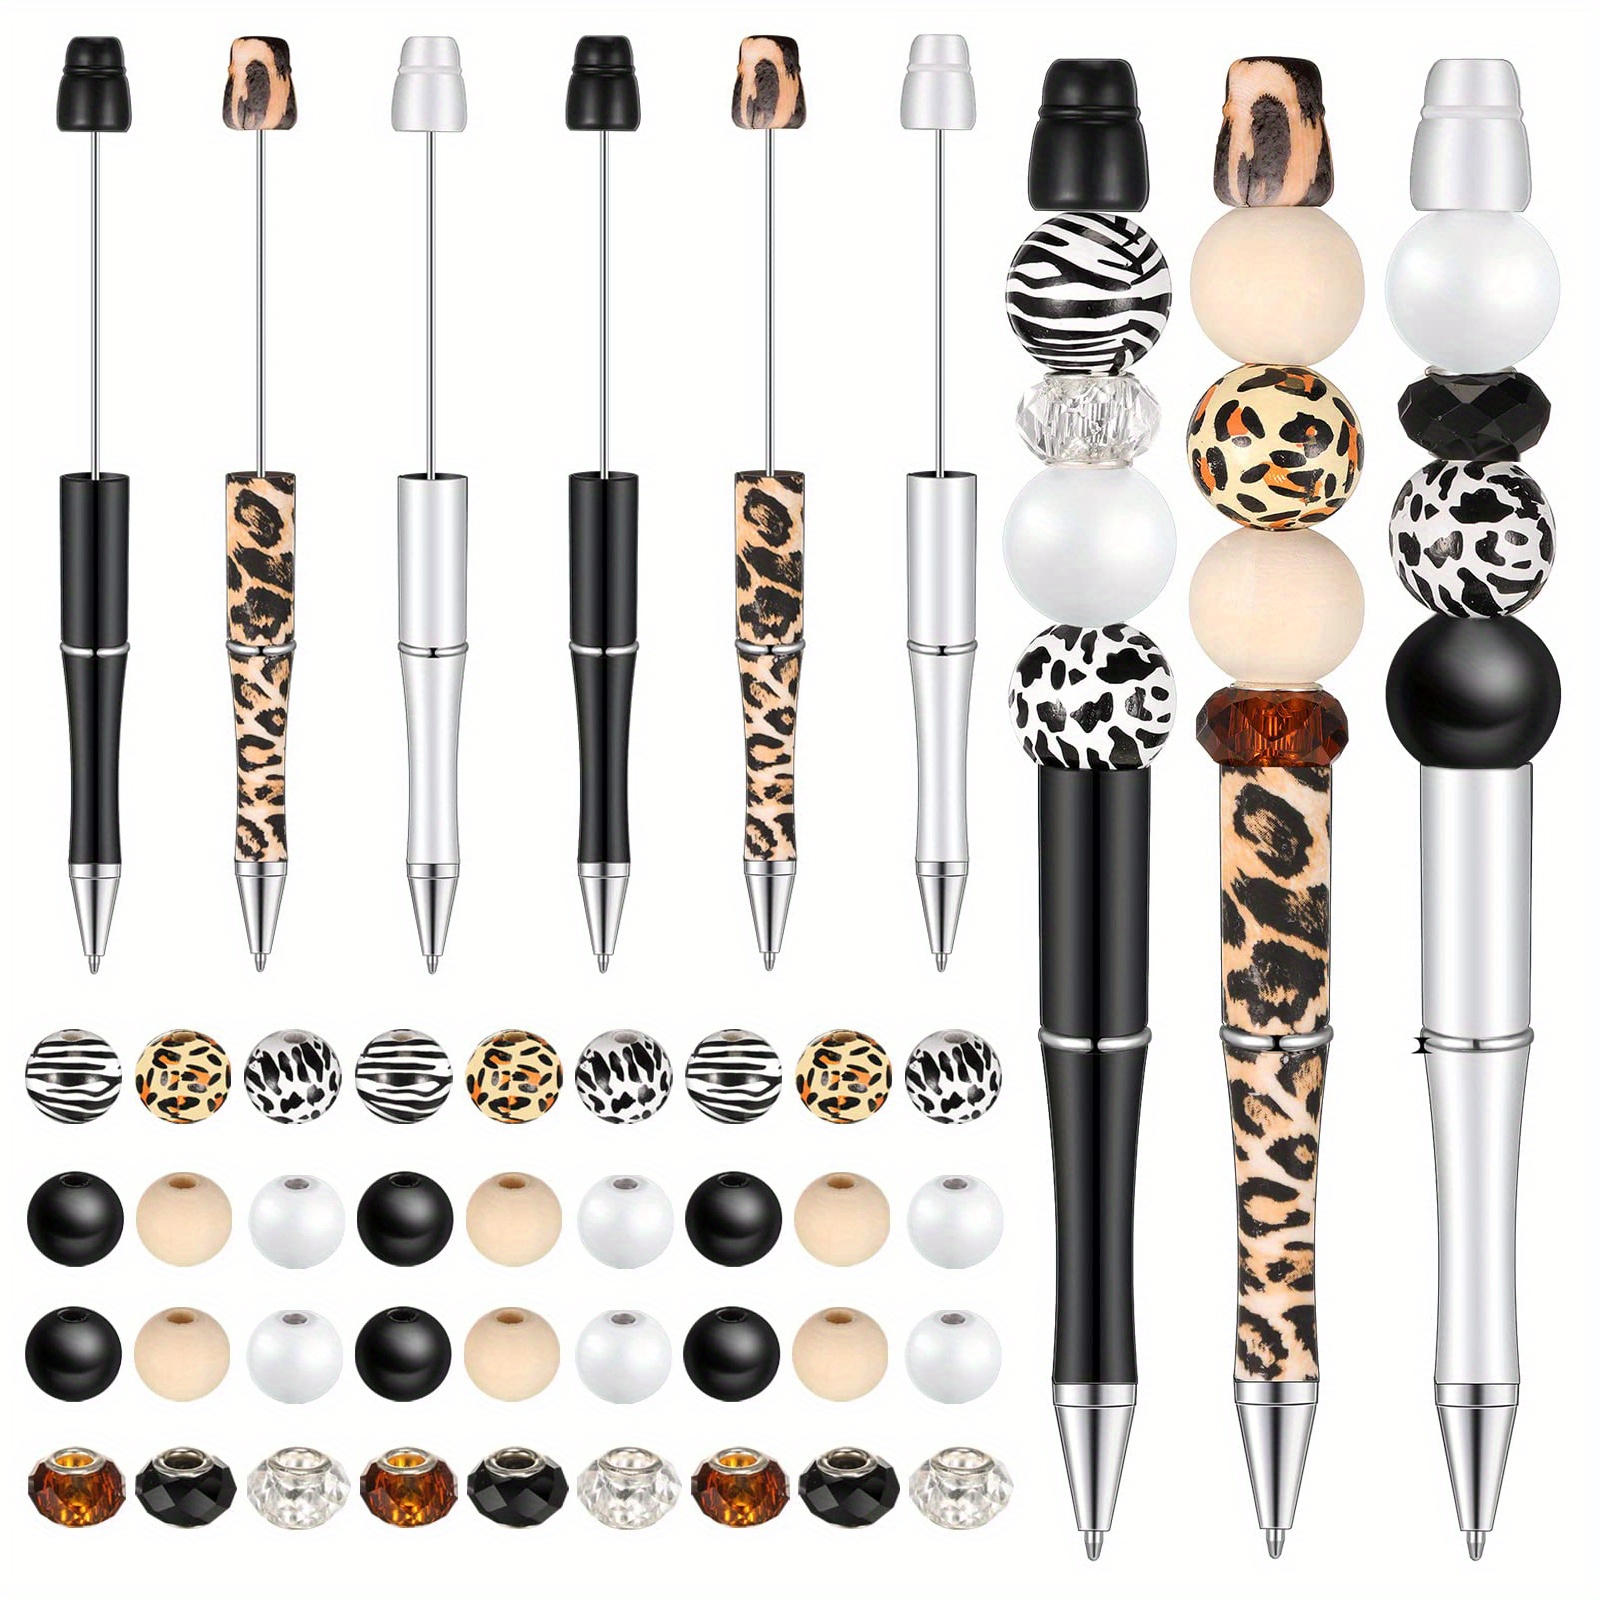 10x Assorted Bead Pen Novelty Writing Pen Black Ink Pens Bead Ballpoint Pen  Crafting Pens for DIY Pen Kits, Gift Supplies, Kids Students violets 